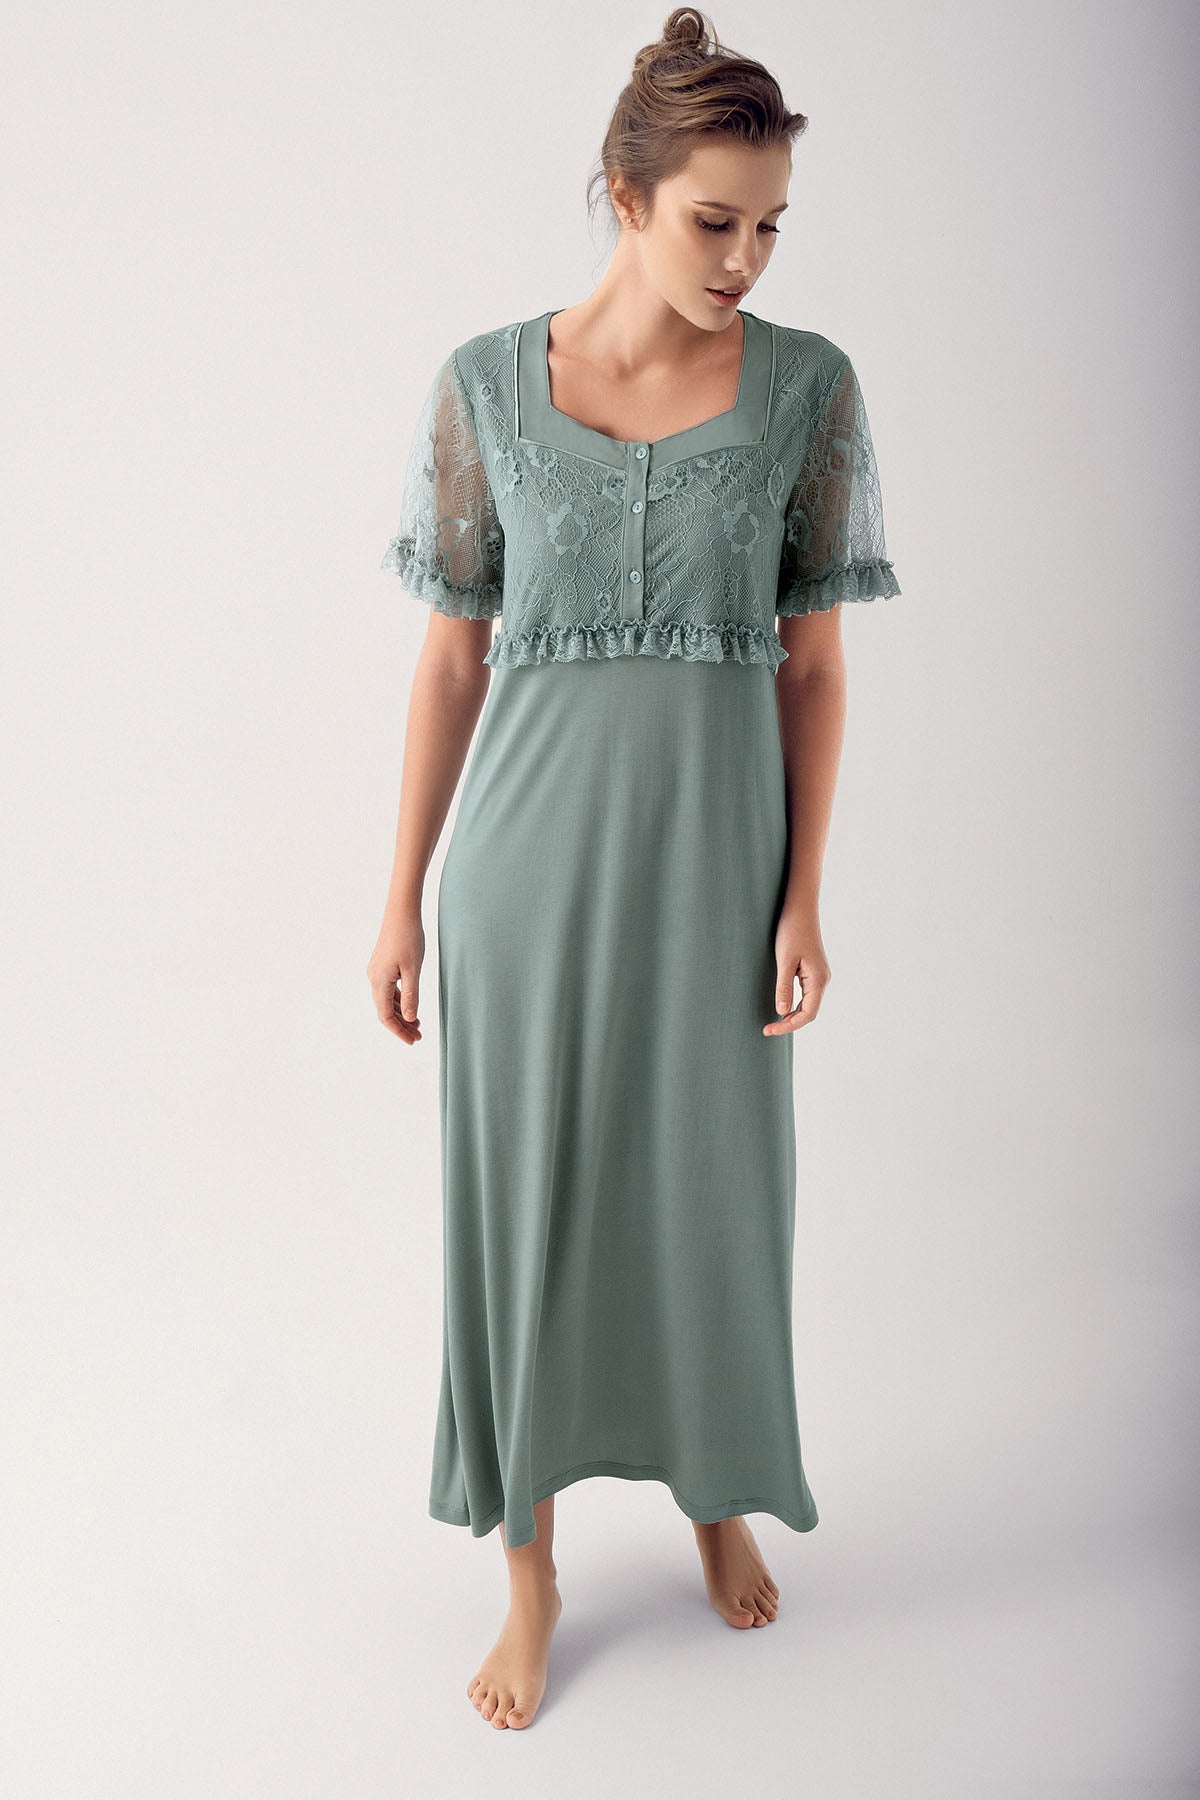 Lace Sleeve Maternity & Nursing Nightgown Green - 14100